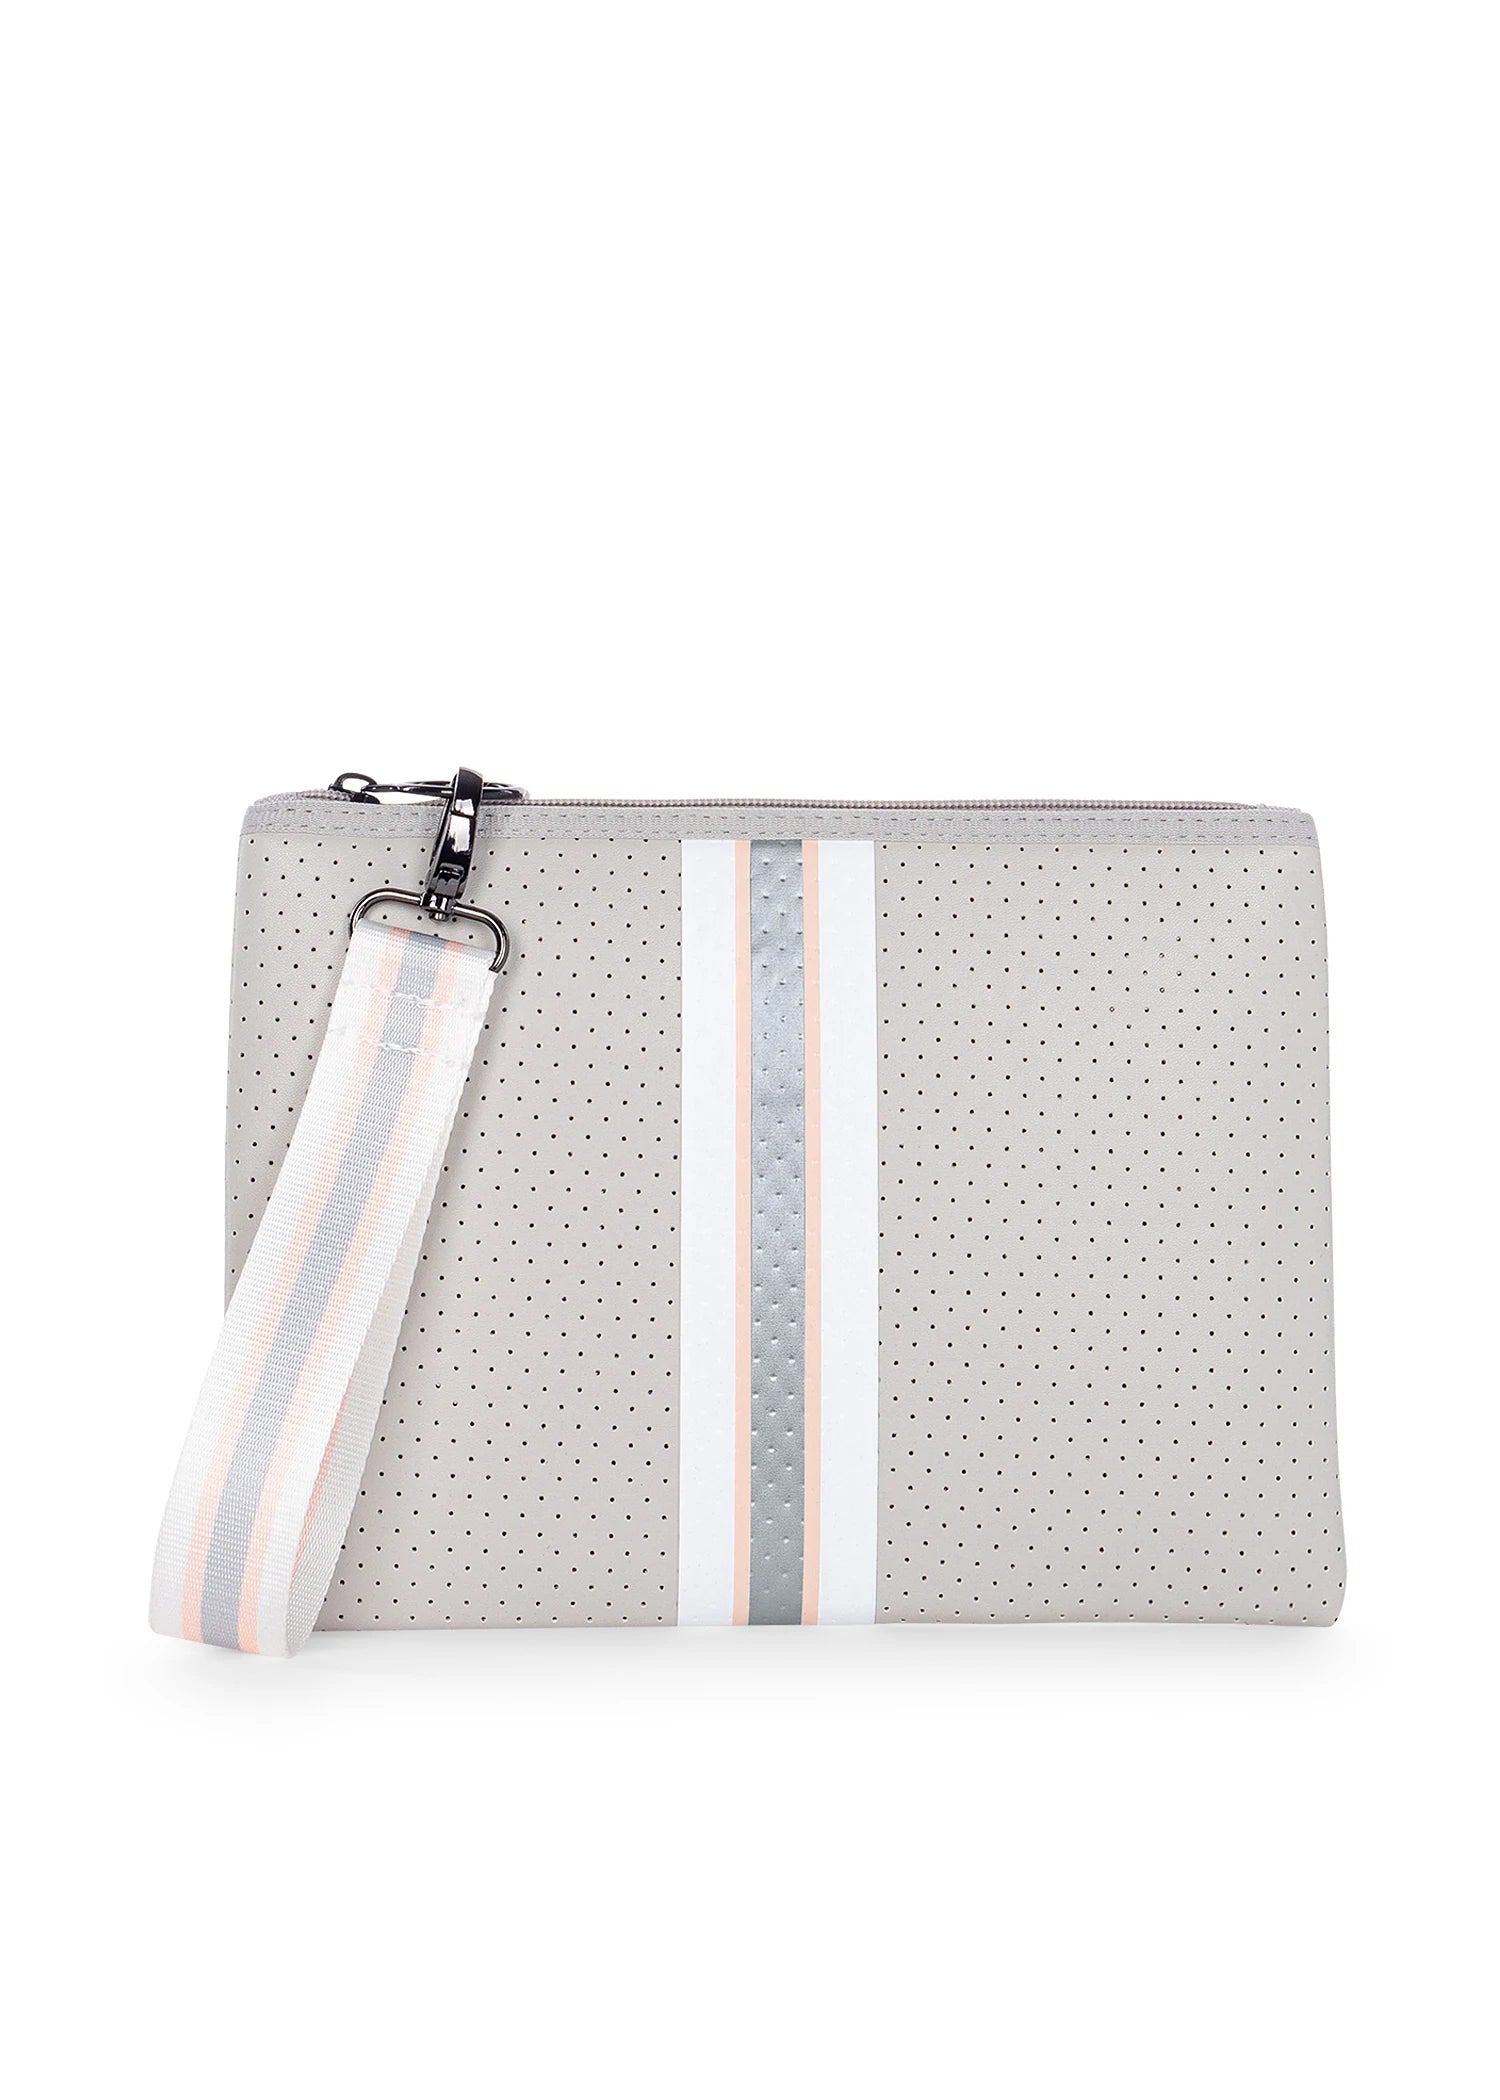 Bally Three-striped Clutch Bag - Only One Size